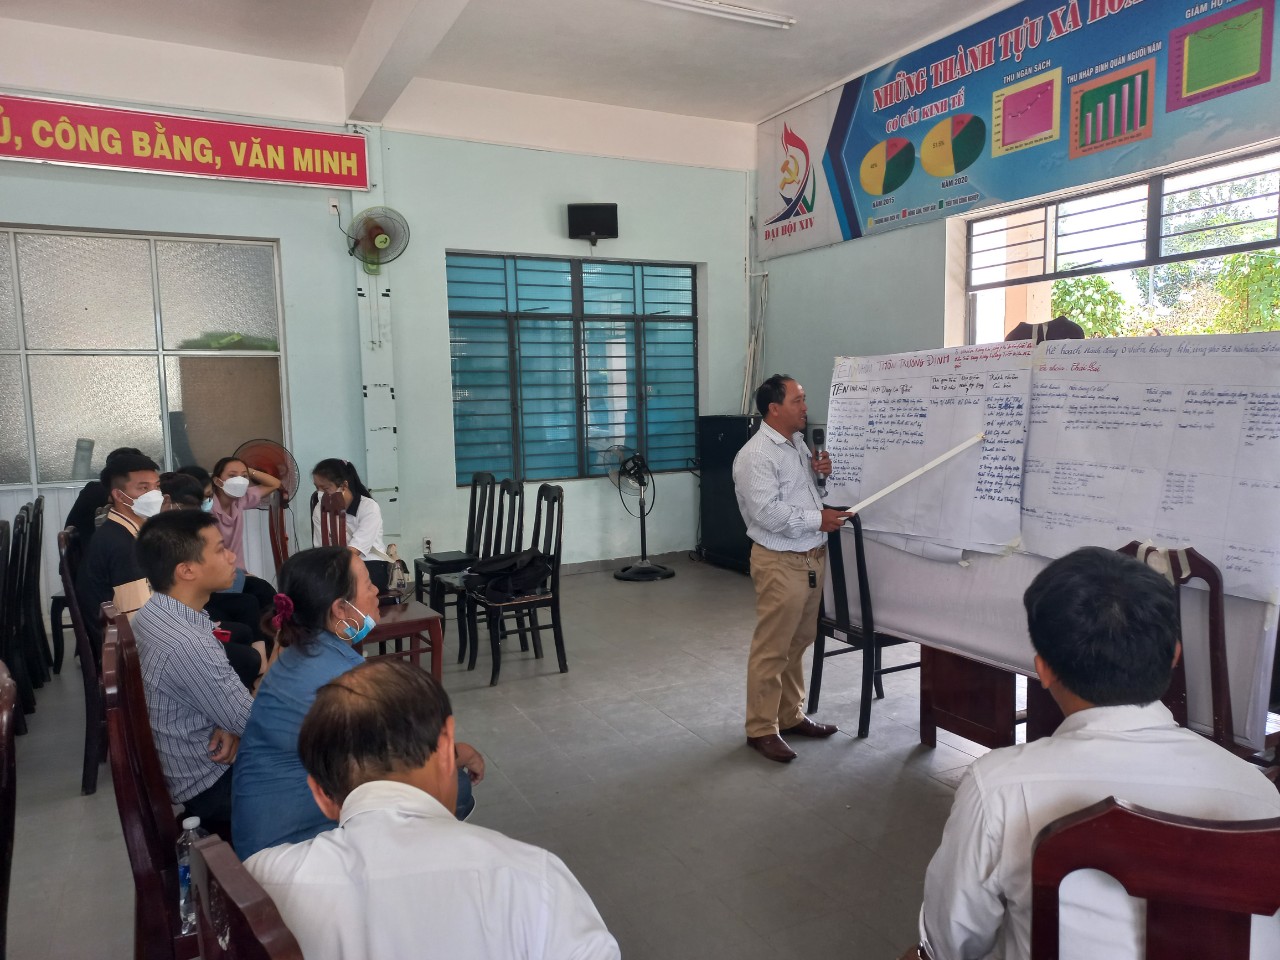 The core group presented the developed plan to the trainees (Hoa Vang)